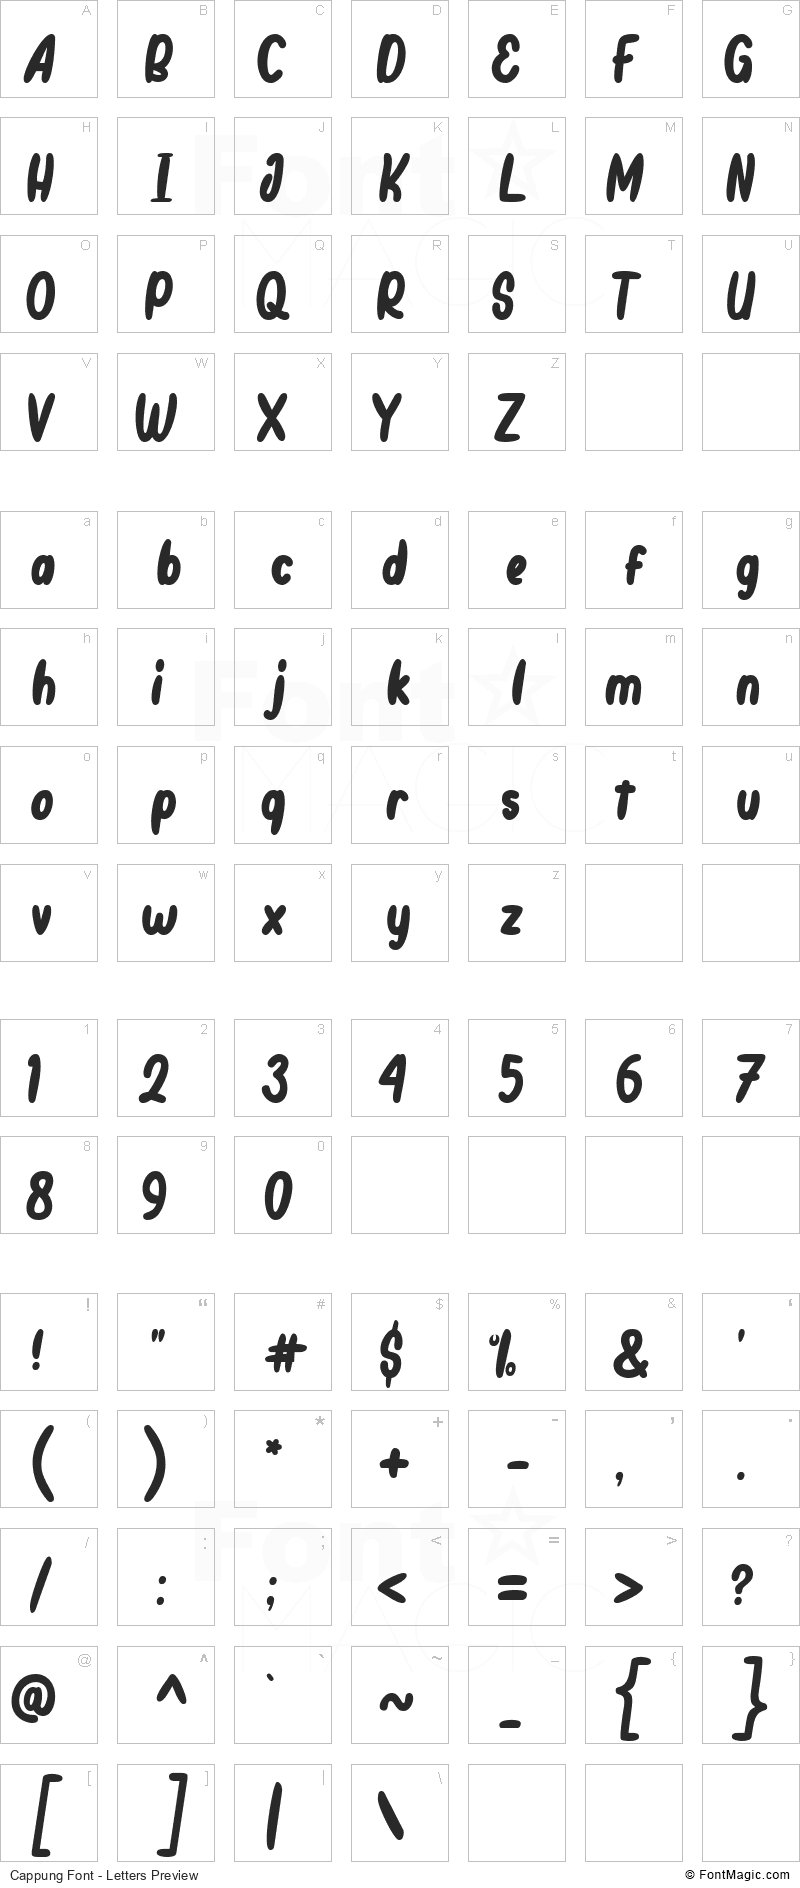 Cappung Font - All Latters Preview Chart